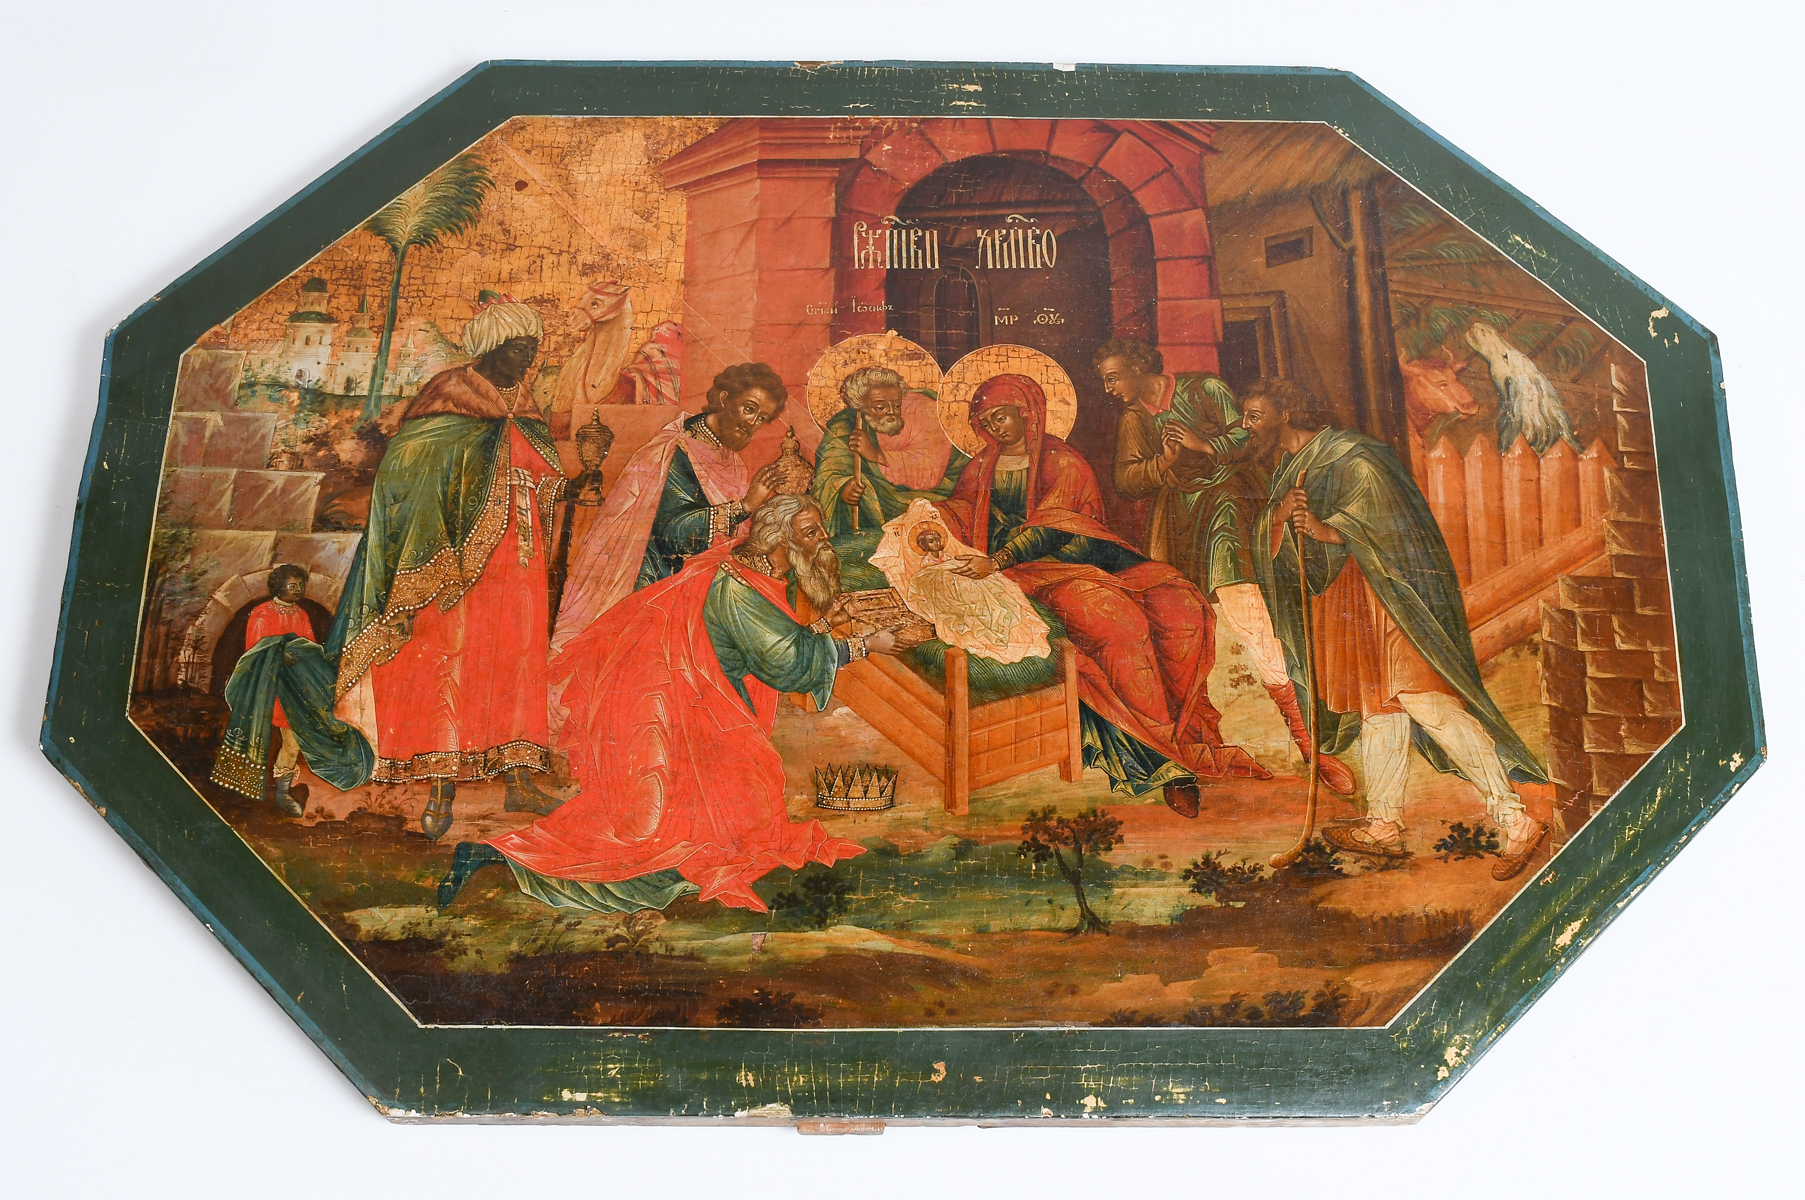 LARGE EARLY RUSSIAN ICON: Depicting